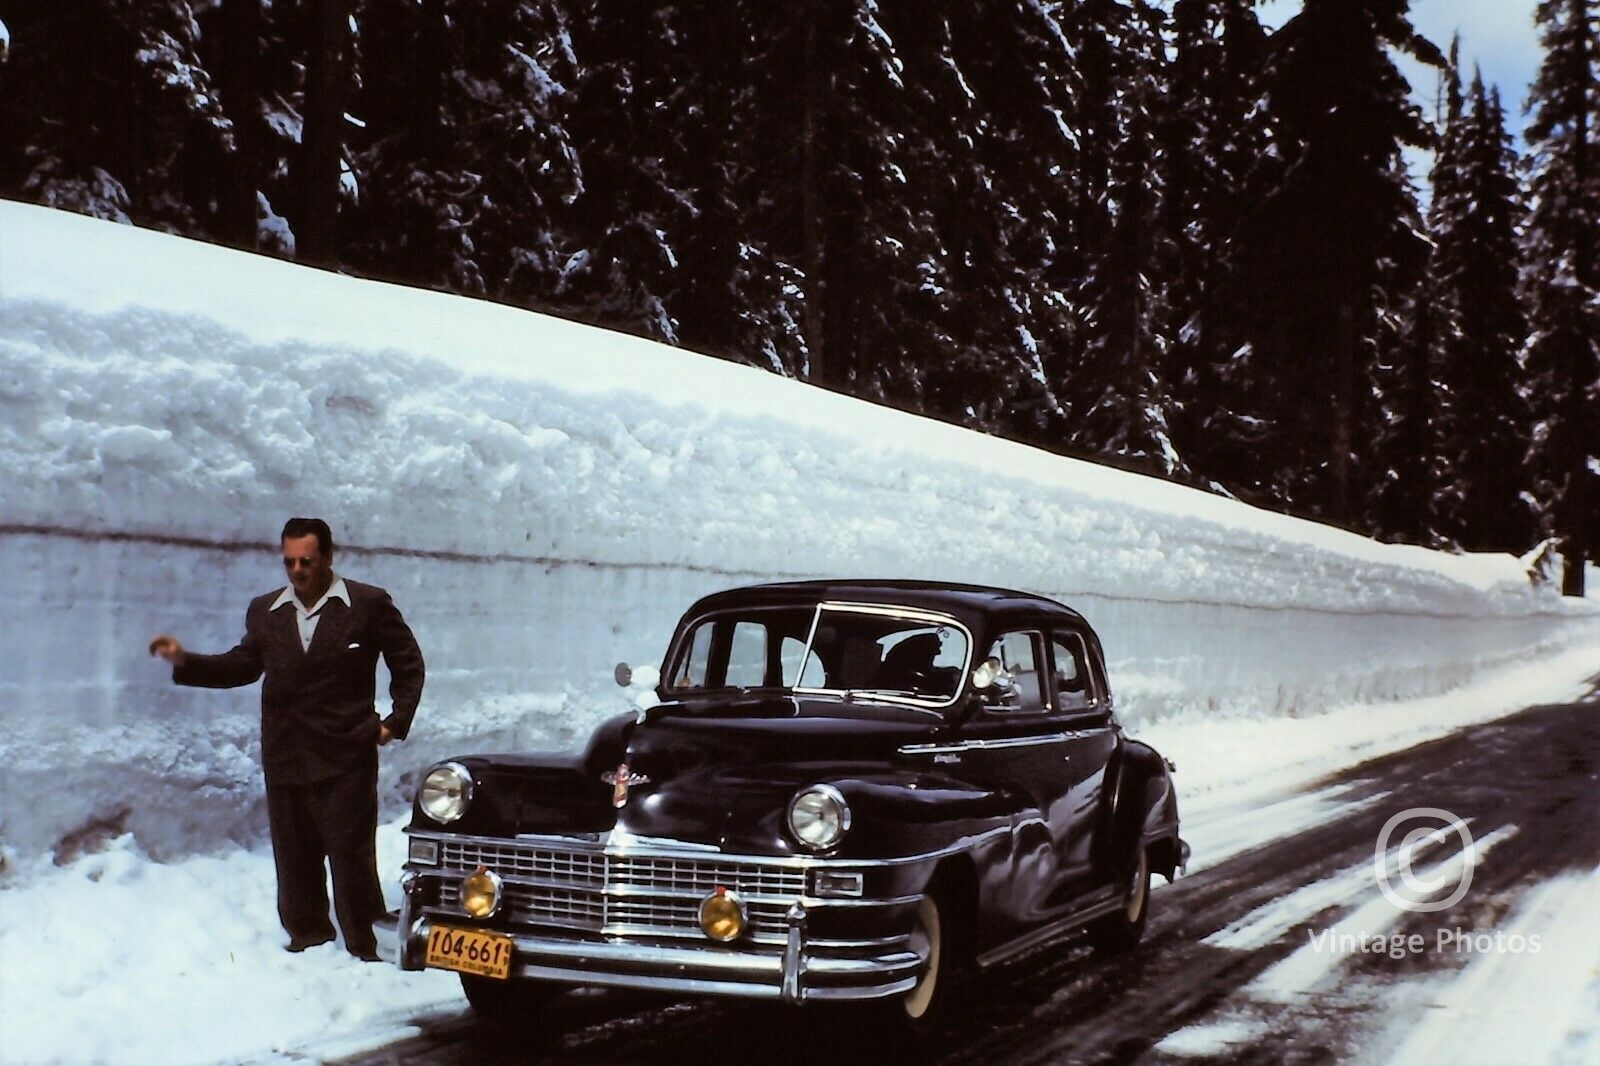 1949 American Classic Car in the snow